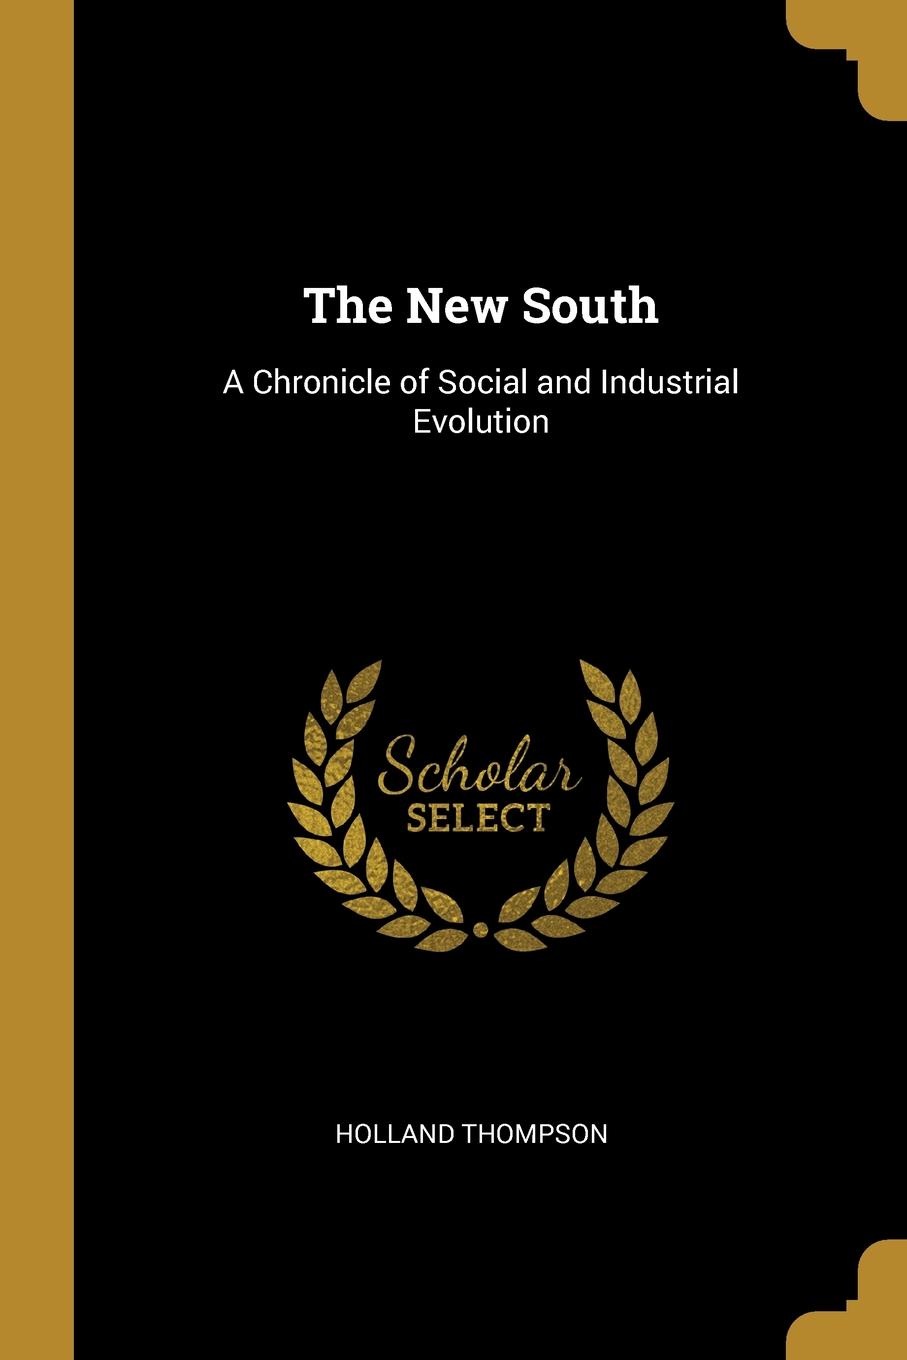 The New South. A Chronicle of Social and Industrial Evolution